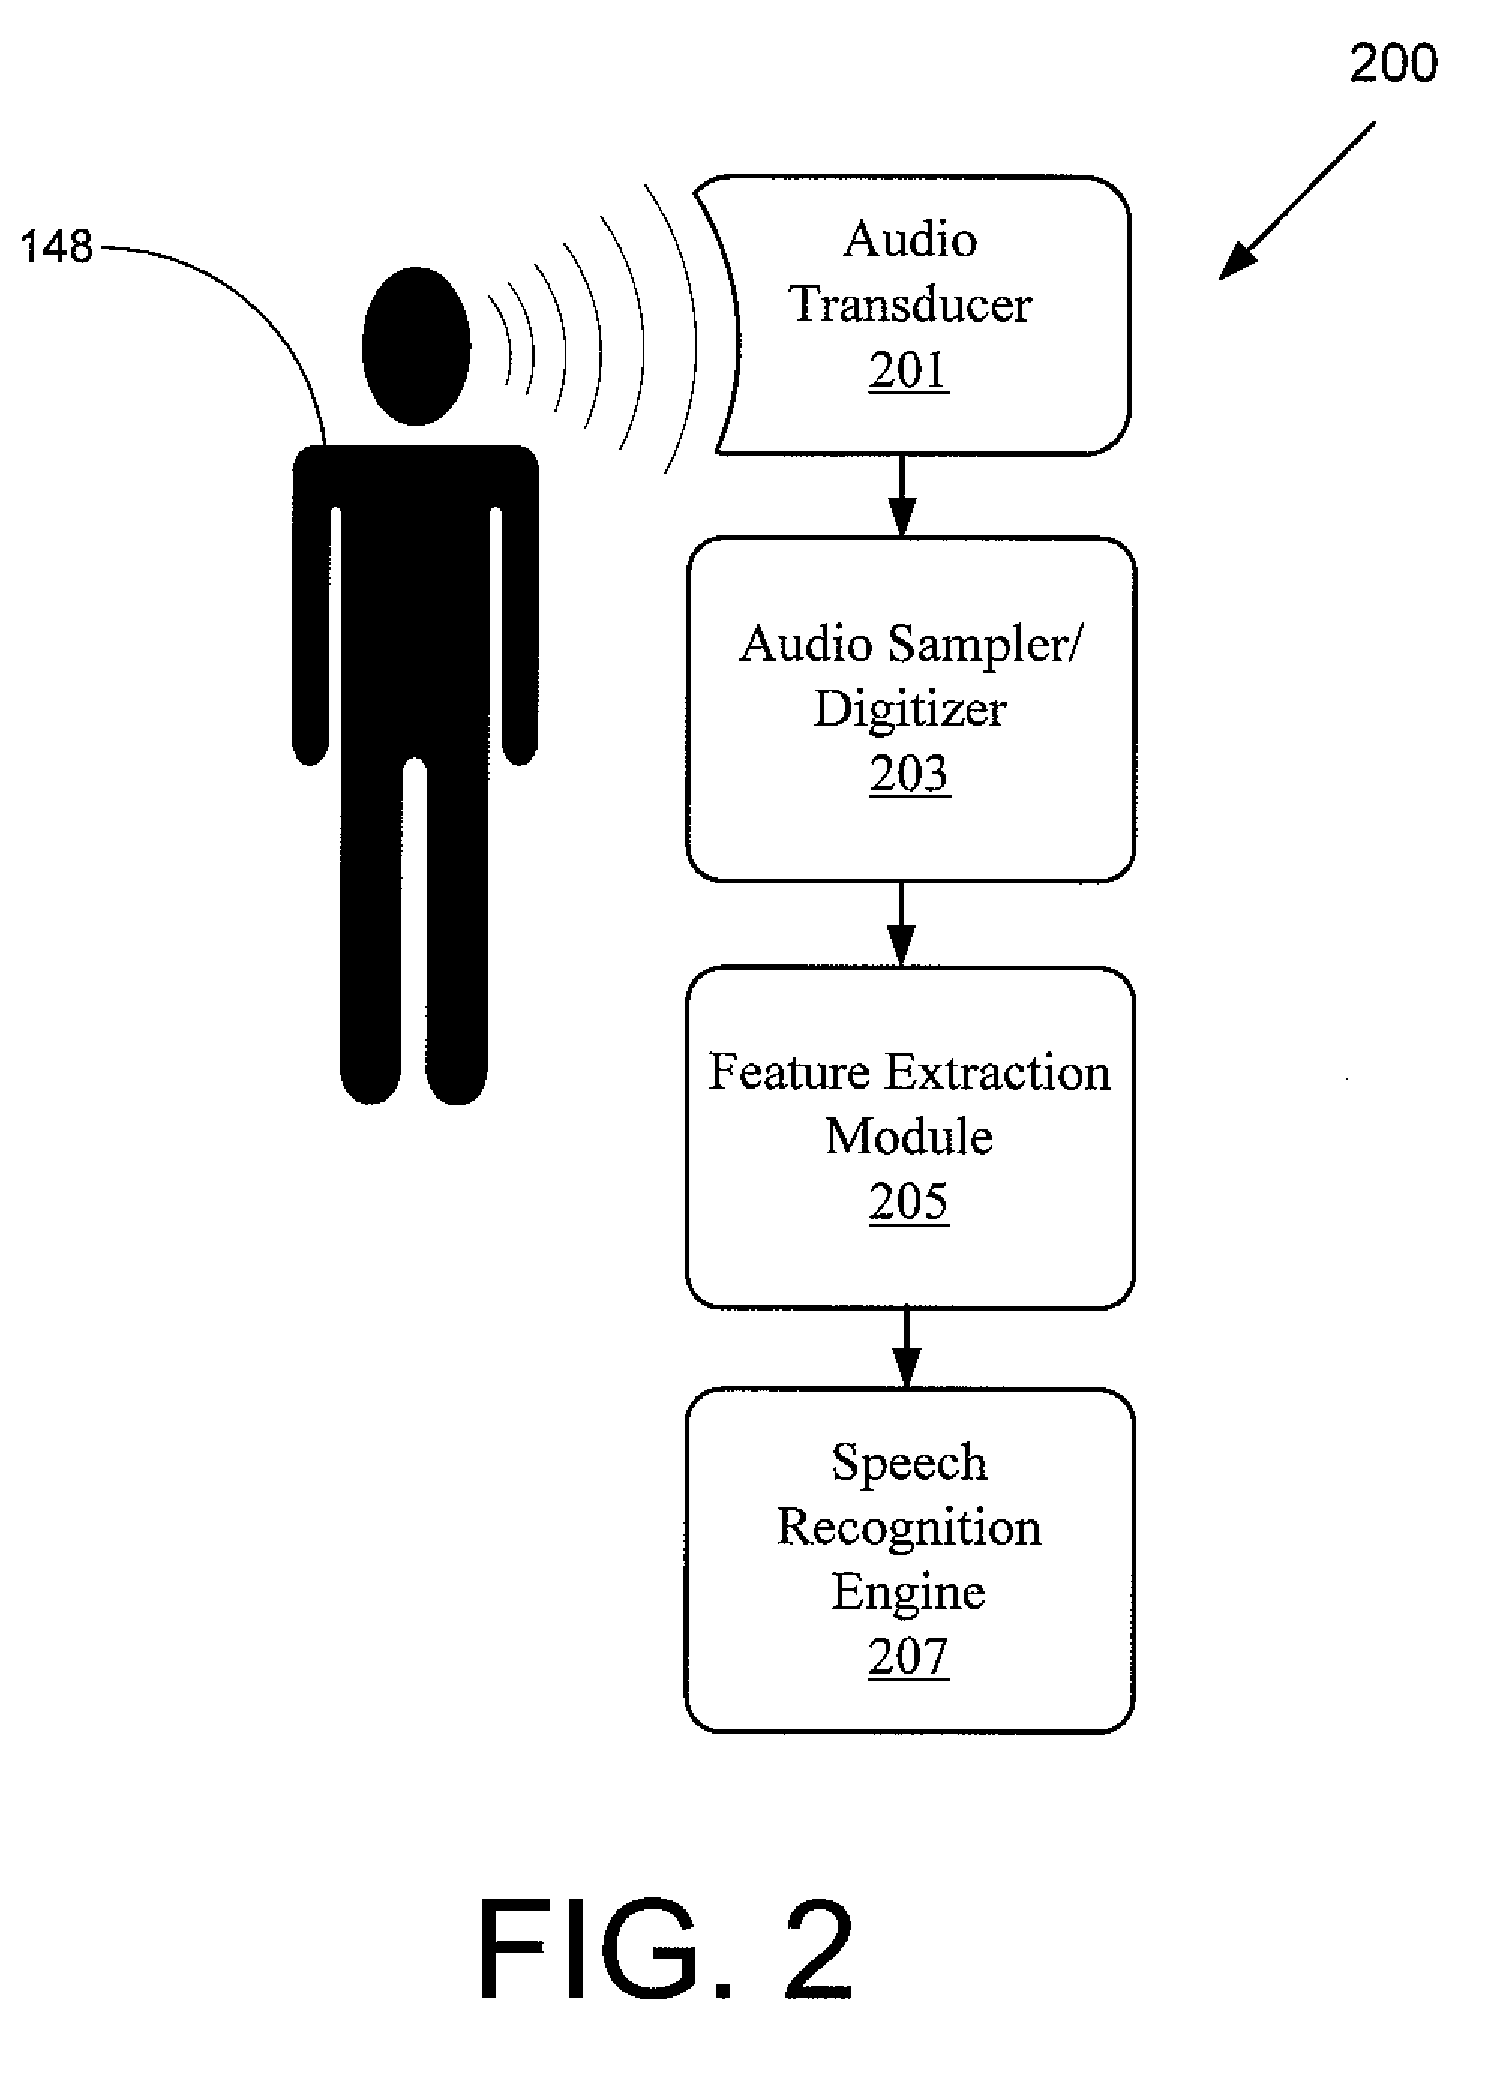 Singular value decomposition for improved voice recognition in presence of multi-talker background noise